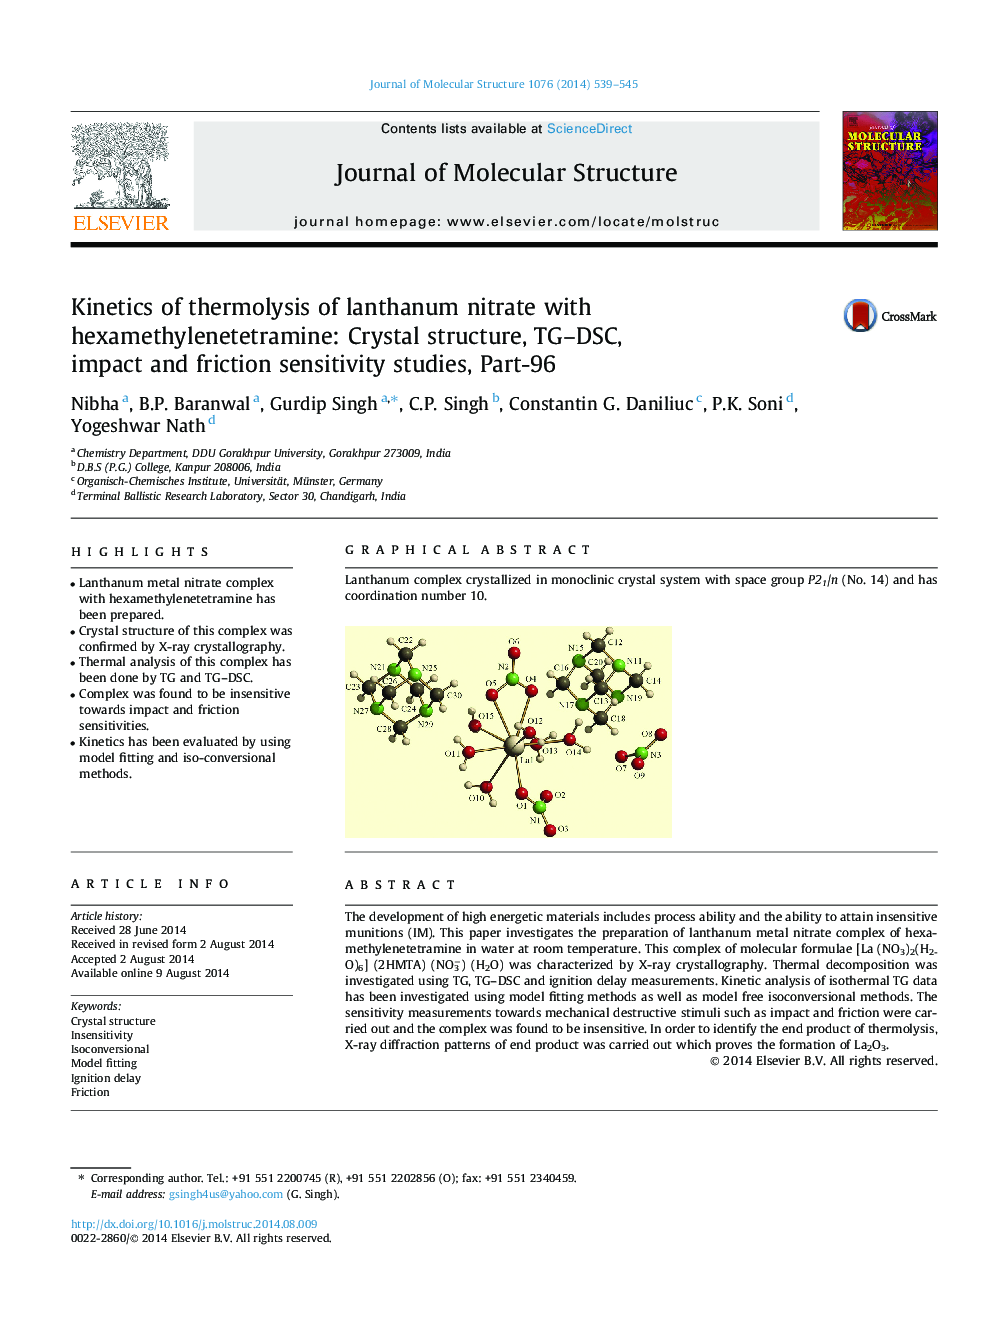 Kinetics of thermolysis of lanthanum nitrate with hexamethylenetetramine: Crystal structure, TG–DSC, impact and friction sensitivity studies, Part-96